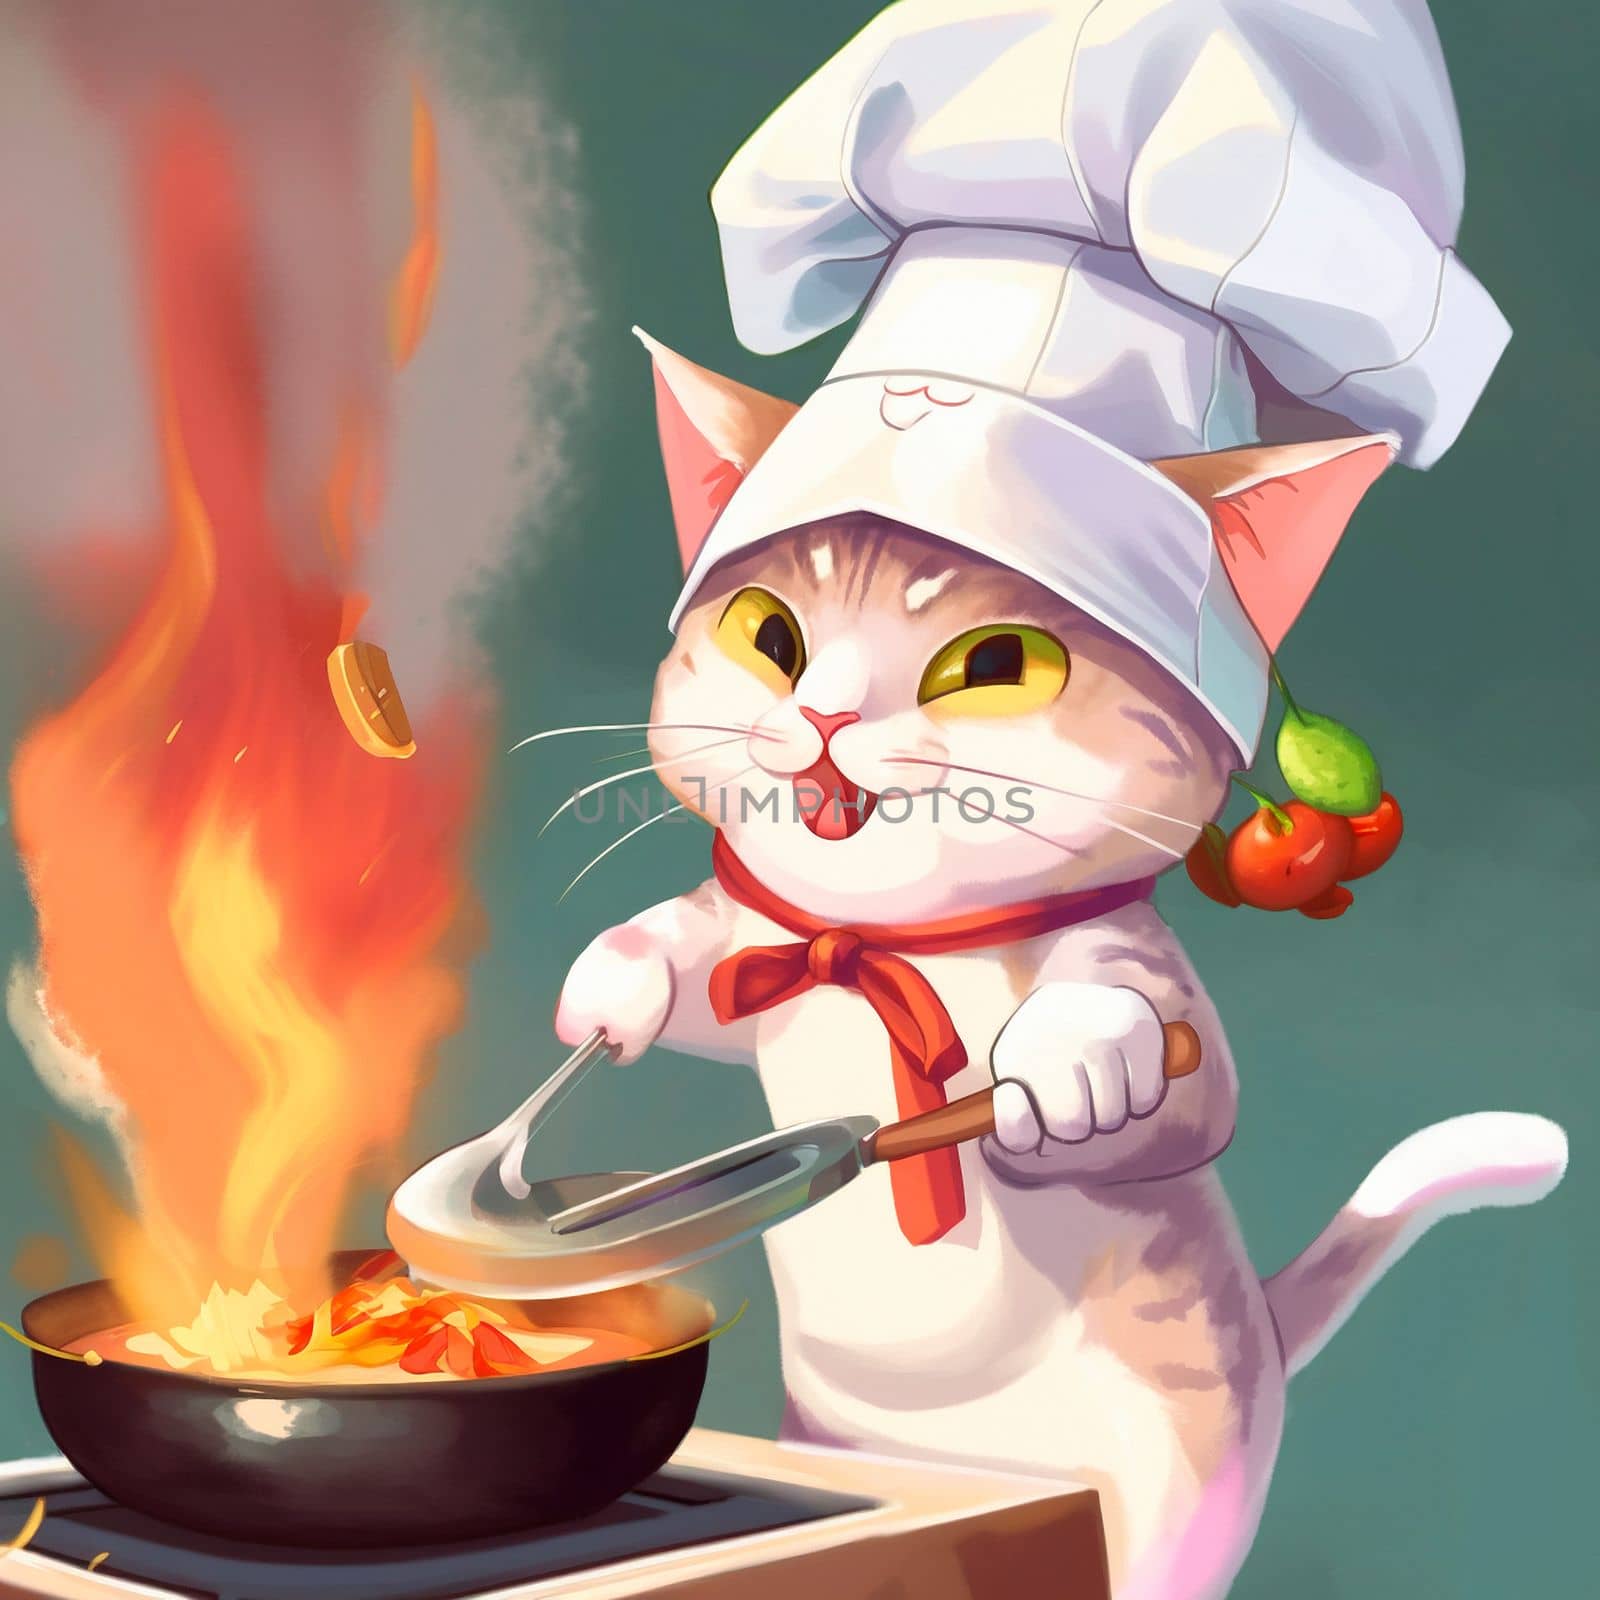 Cartoon image of a cook's cat in a chef's hat, who cooks something in the kitchen, cartoon by NeuroSky